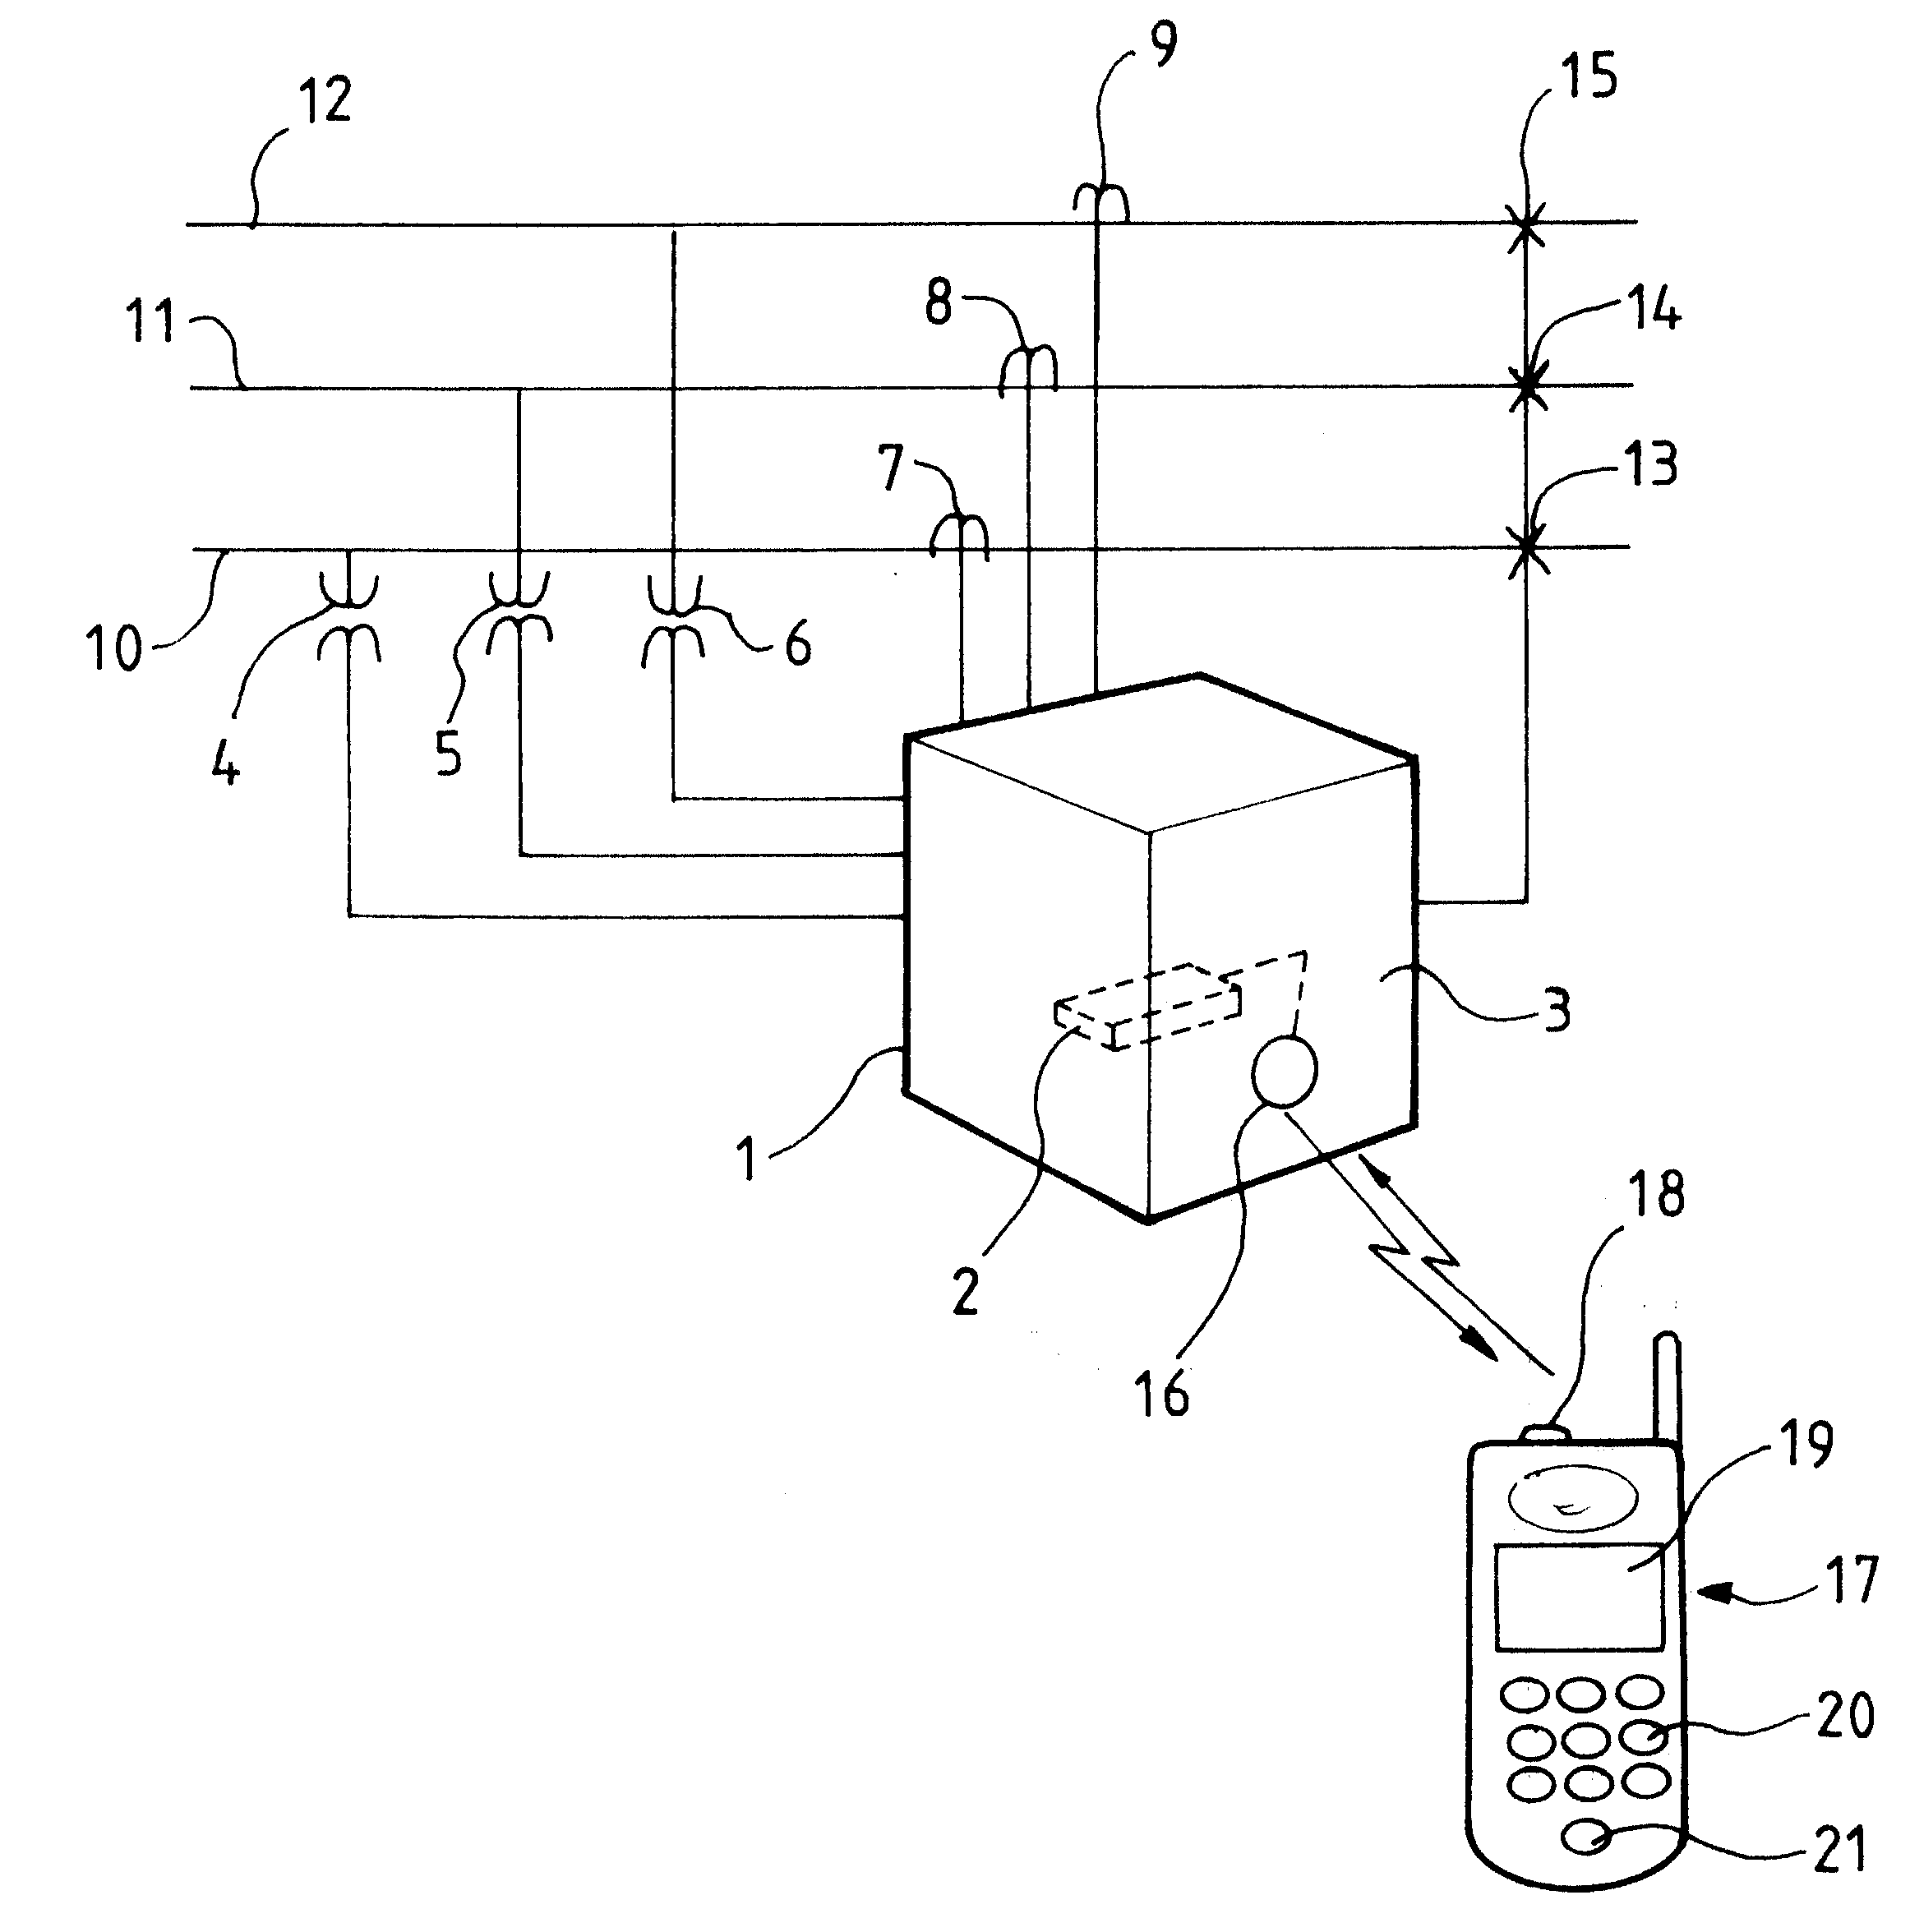 Protection system for an electricity network having a data transmission radio link